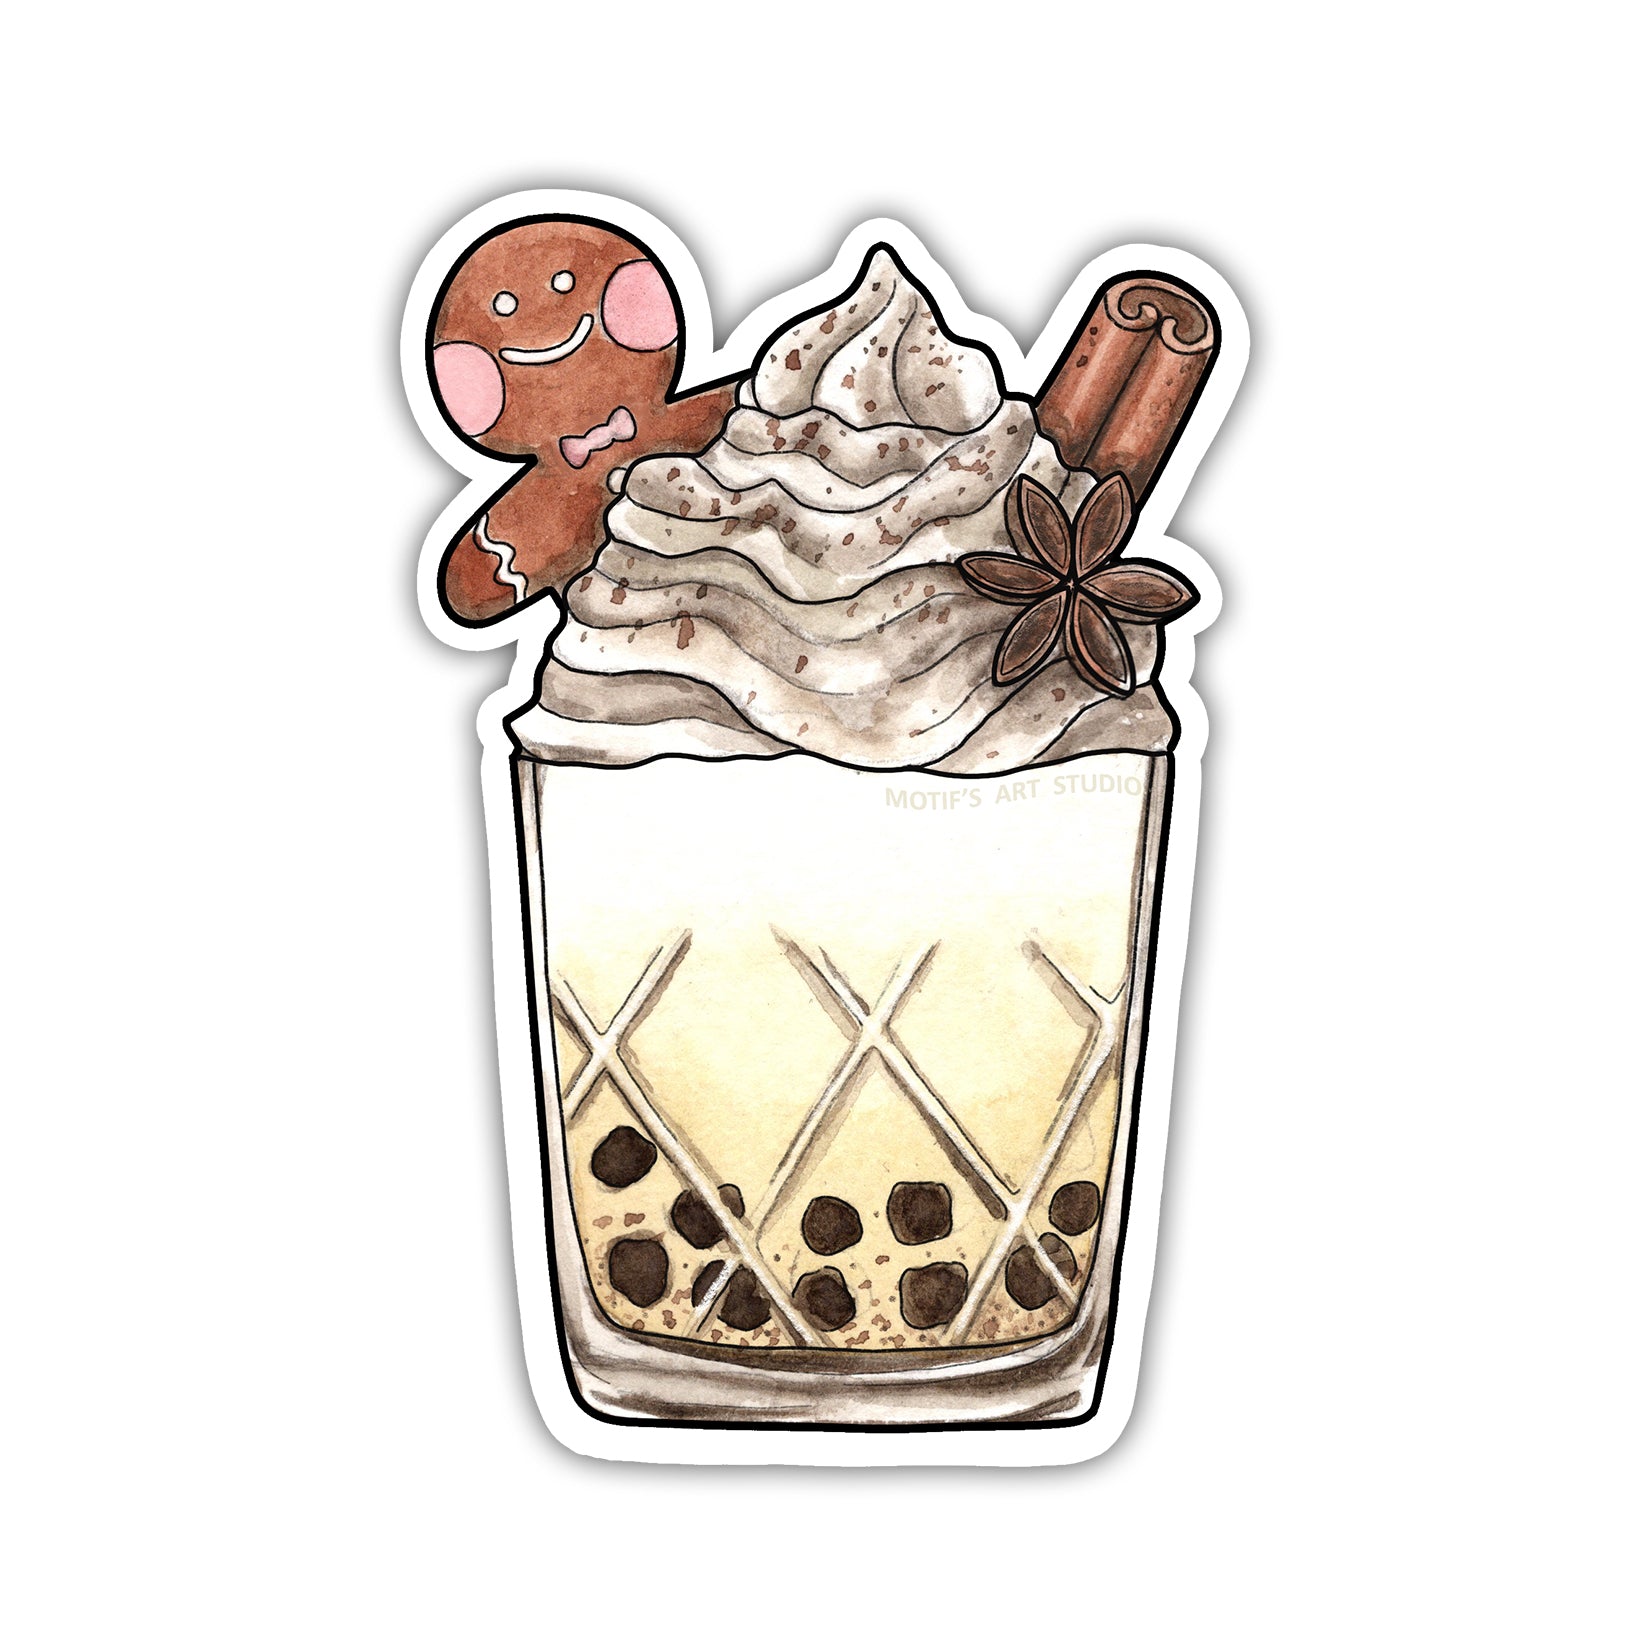 Eggnog drink with boba, topped with a gingerbread man, whipped cream, star anise, and a cinnamon stick.